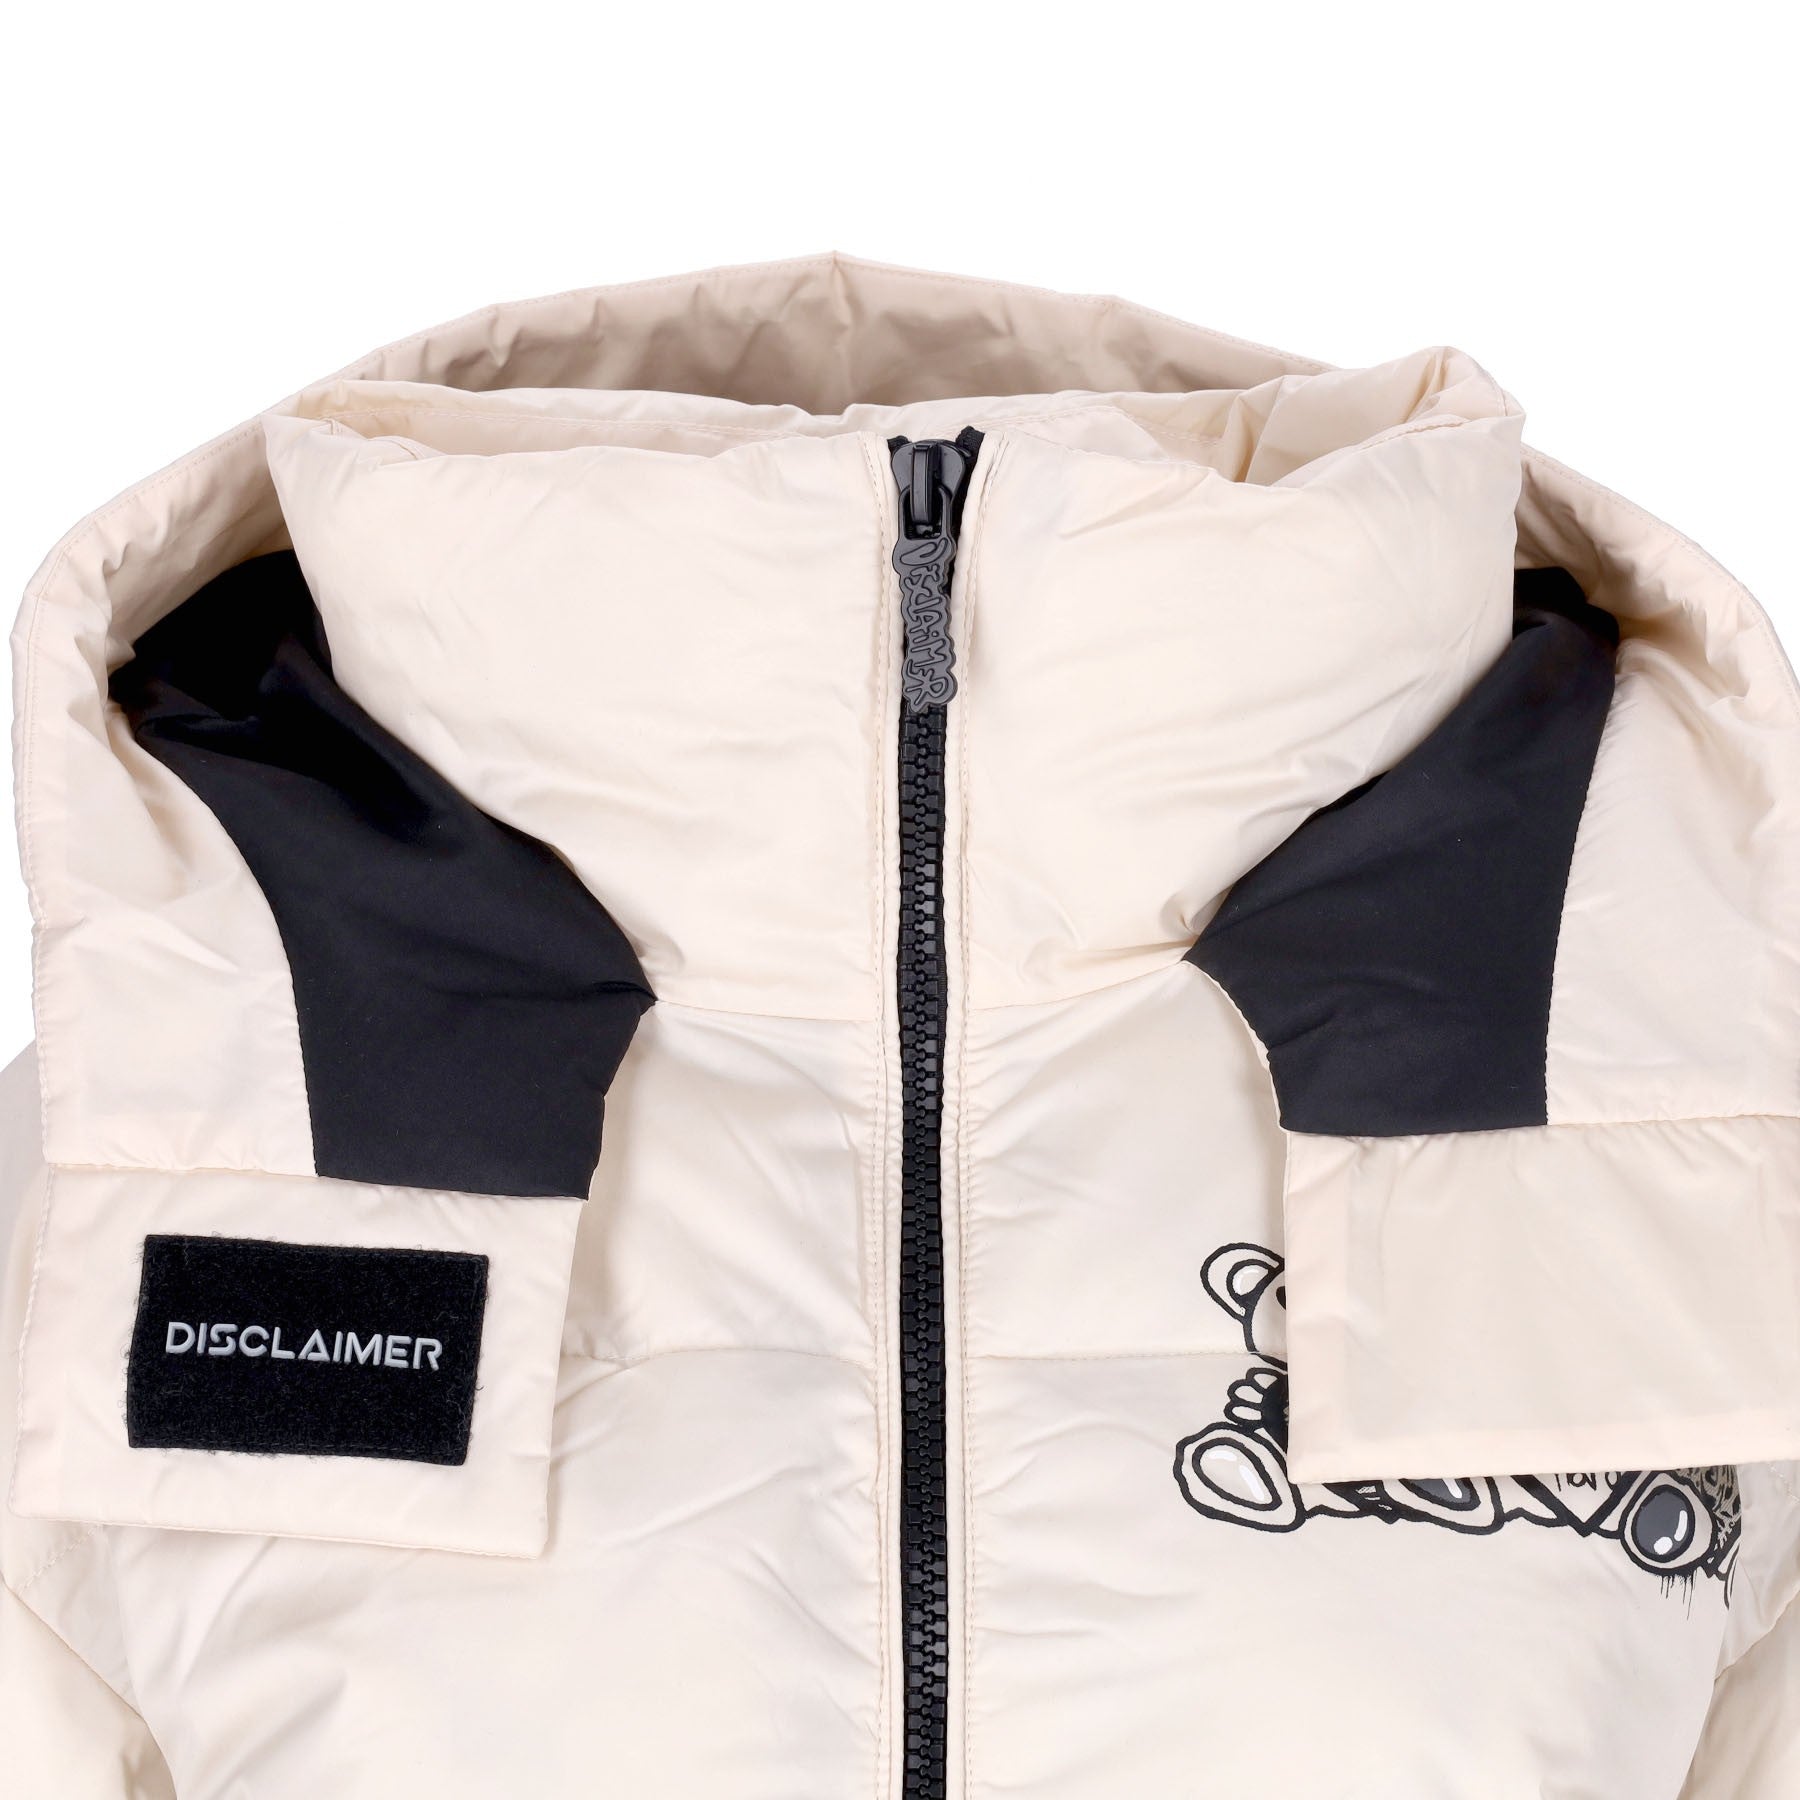 All Right Reserved Women's Padded Jacket Cream